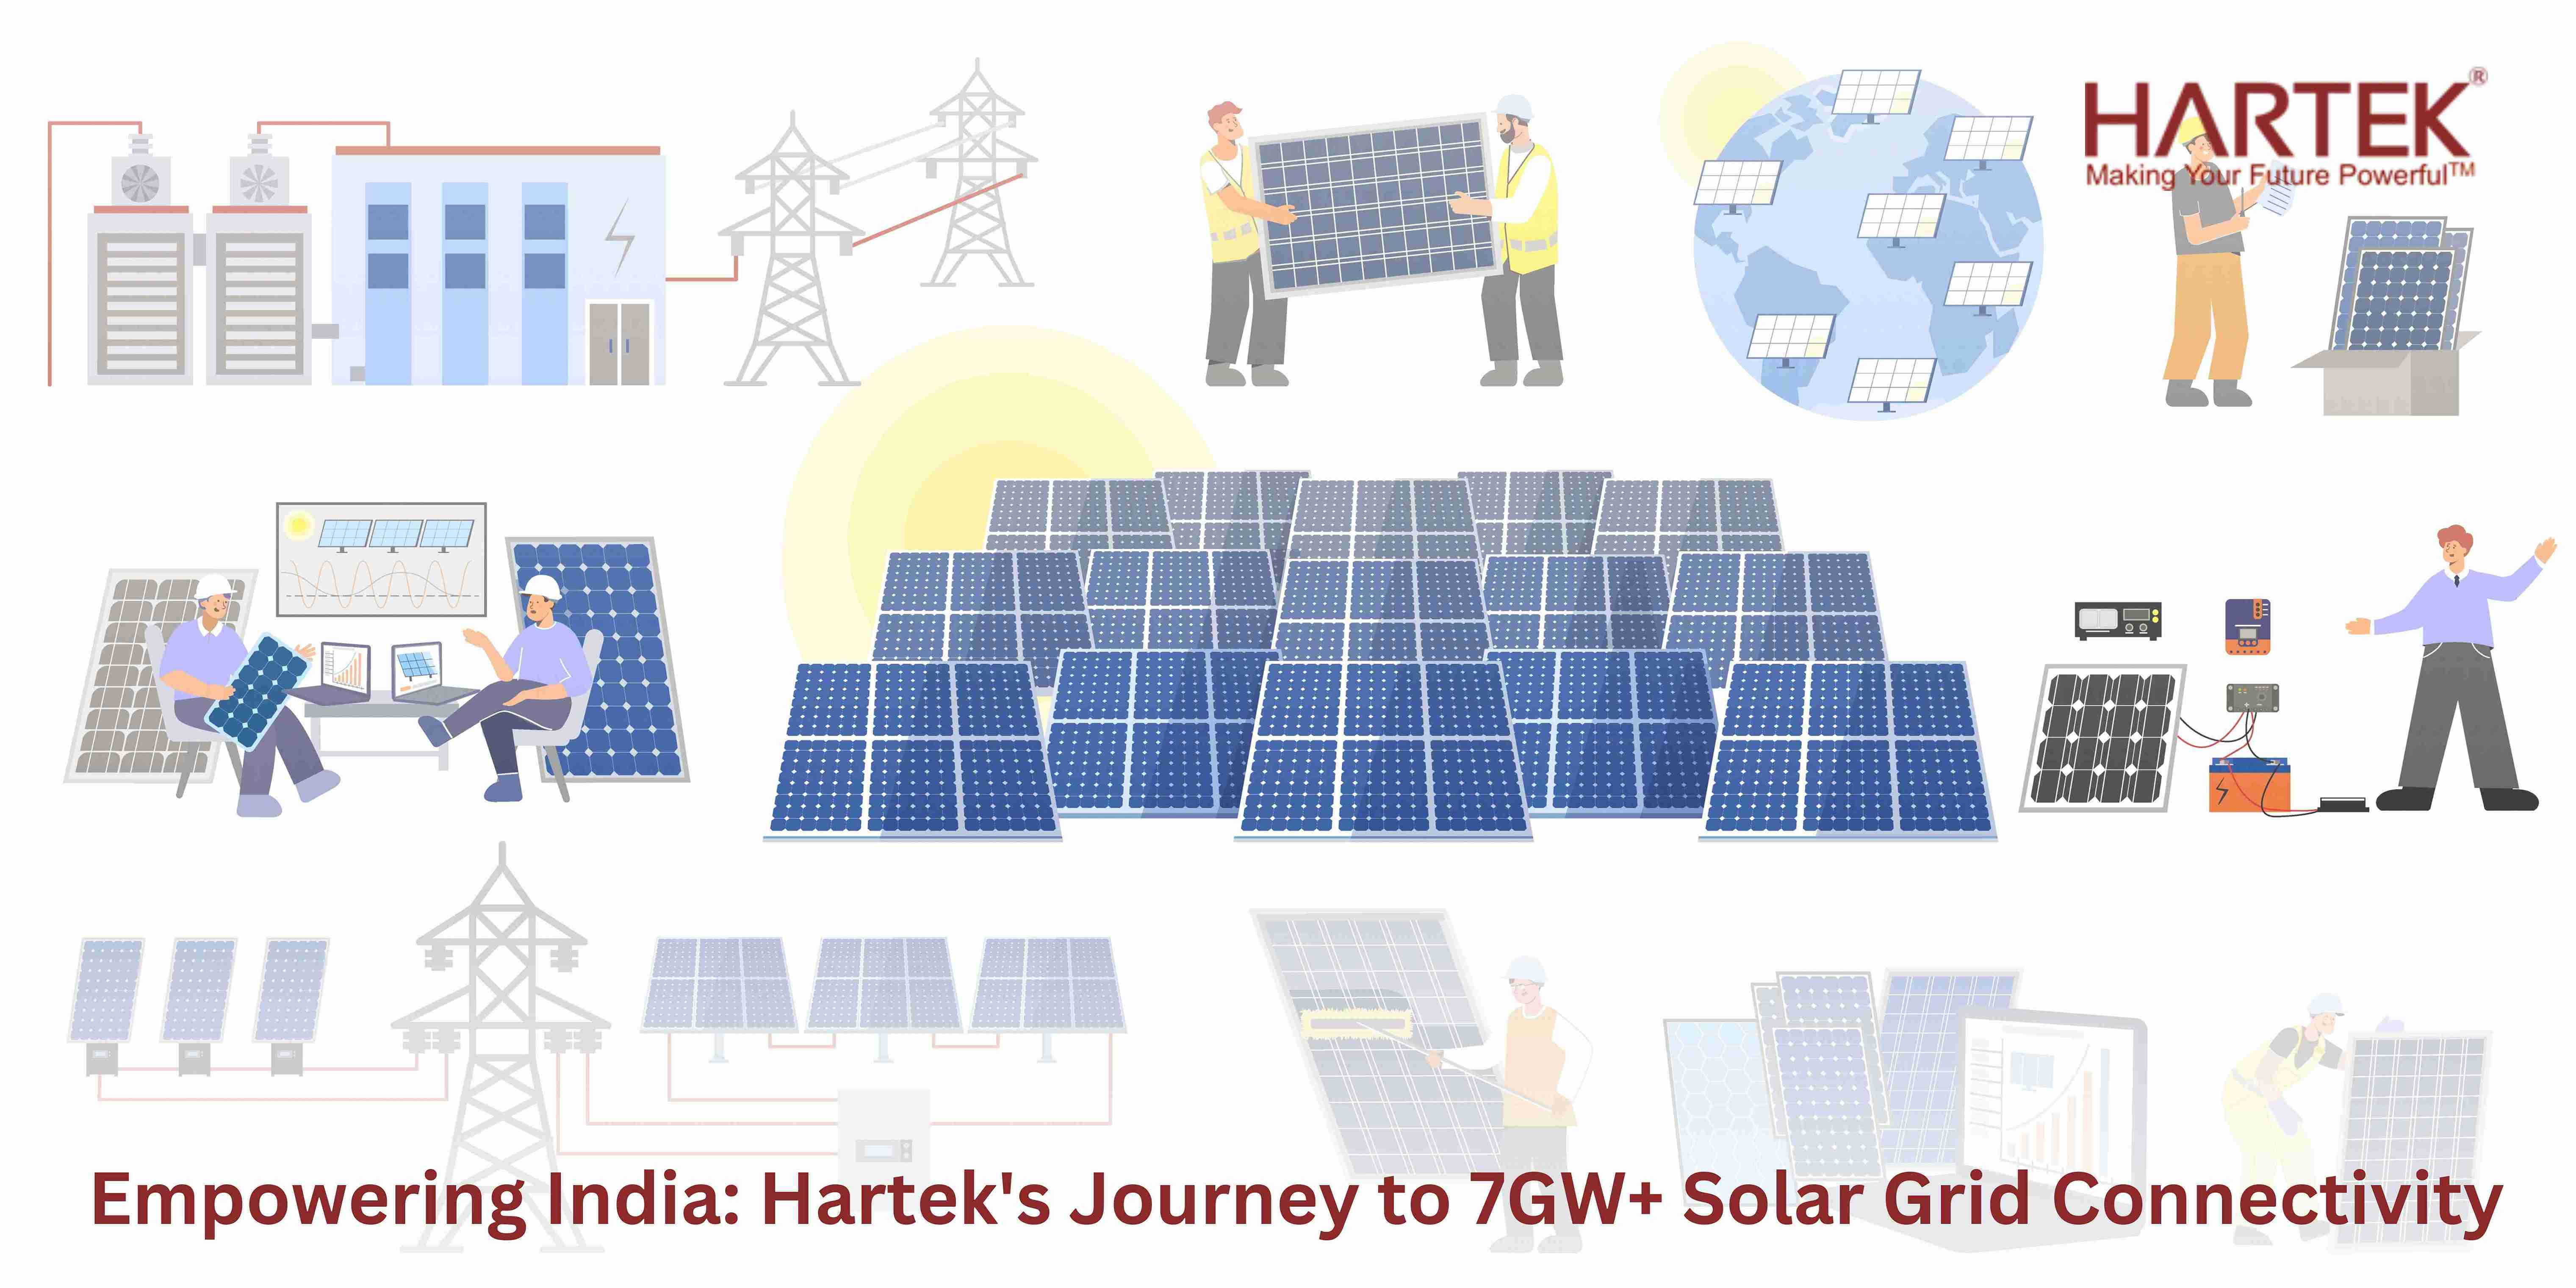 Hartek Group: A Journey to 7GW+ and Beyond to Empower India | Hartek Group - EPC